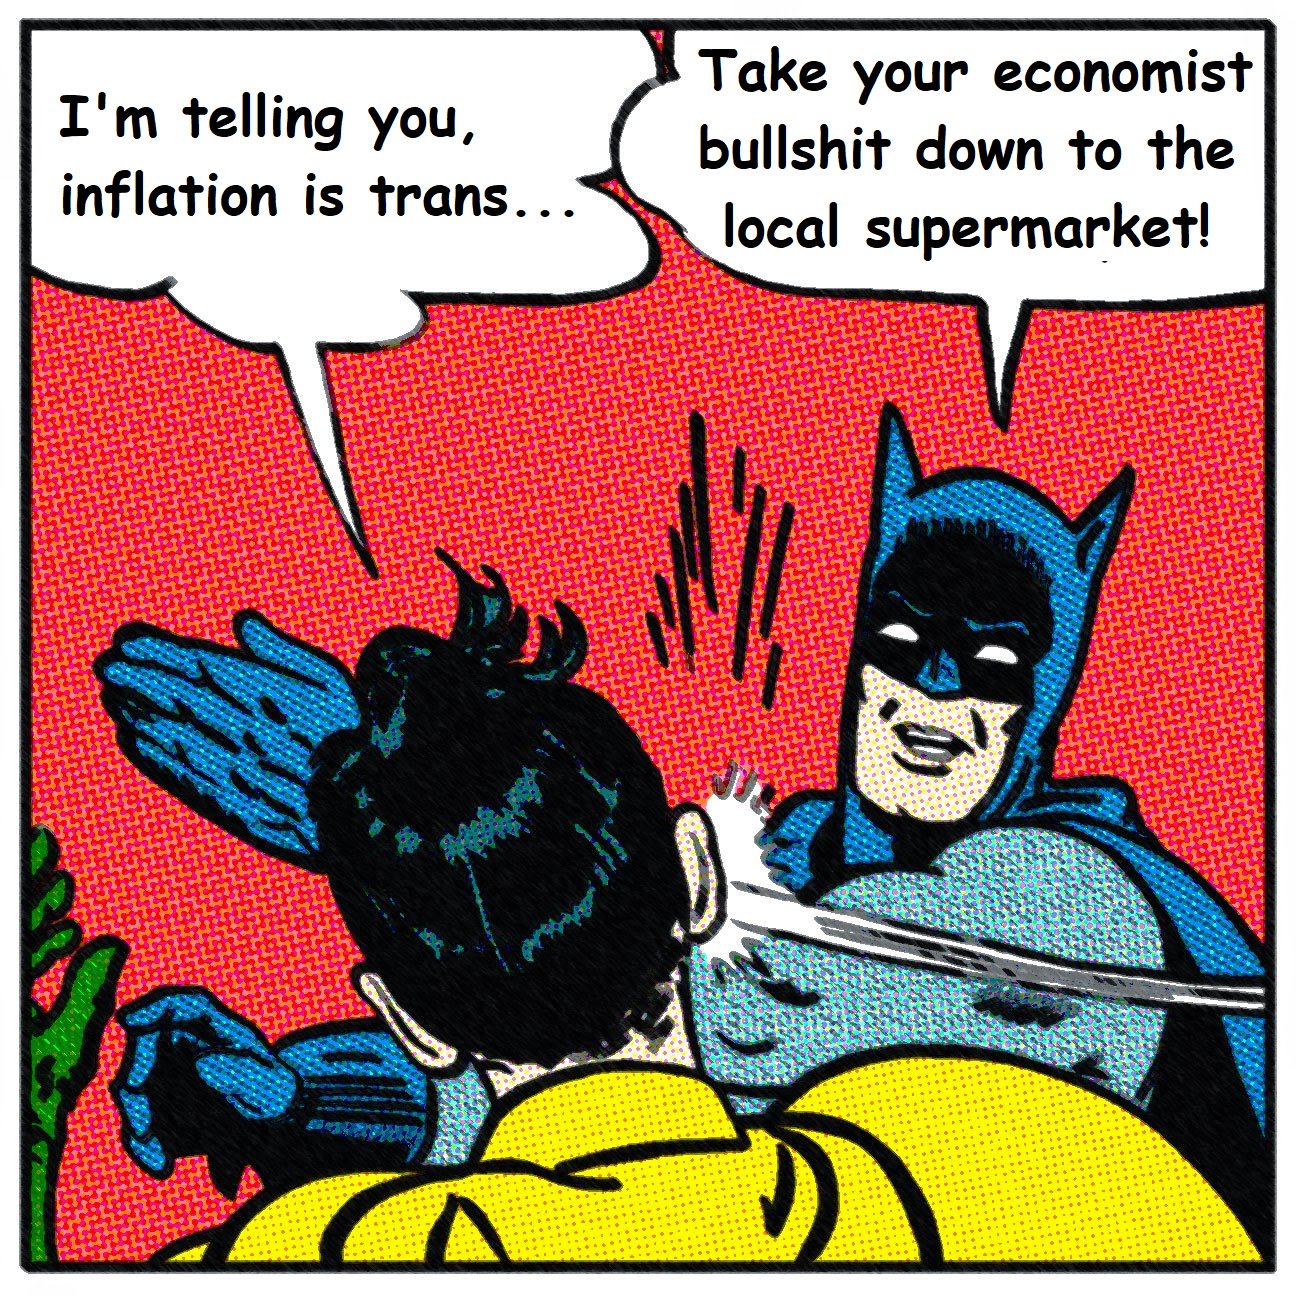 Rudy Havenstein, casual observer. on Twitter: &quot;Batman gets it. #Transitory  https://t.co/1PT3EuL3jx&quot; / Twitter